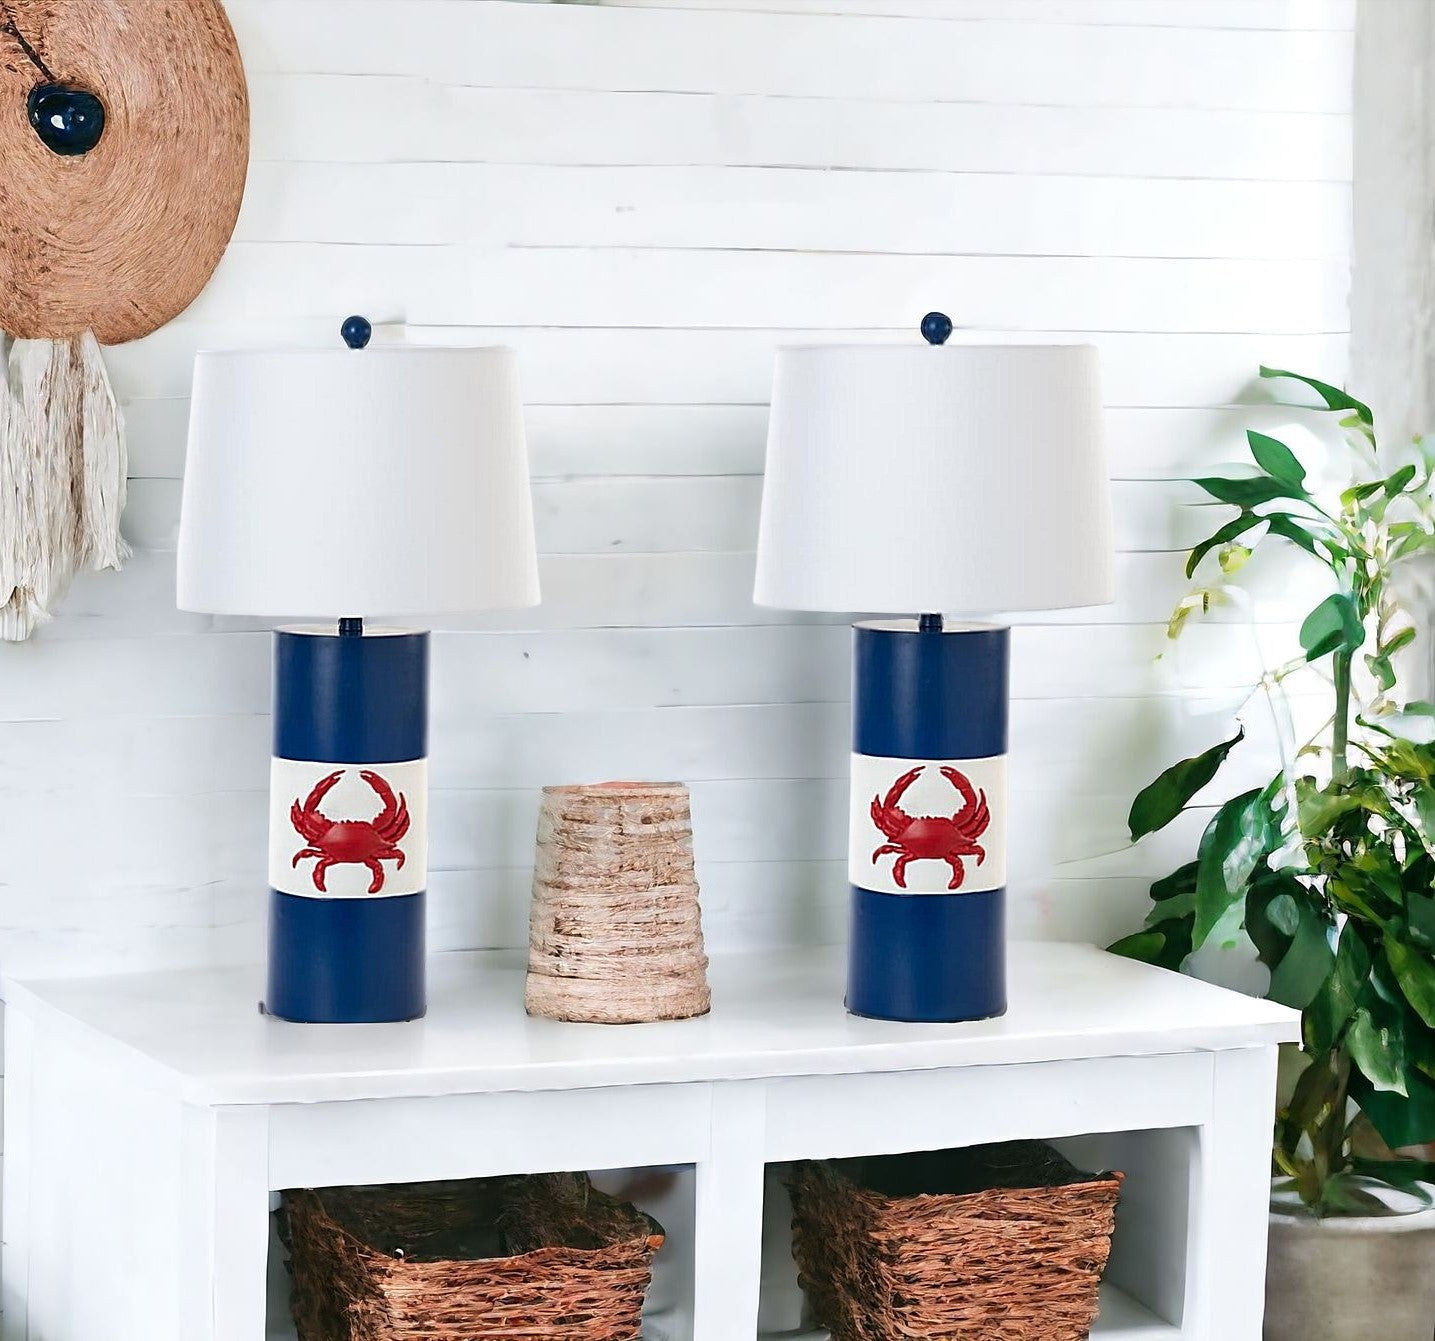 Set of Two 31" Red White and Blue Coastal Table Lamps With White Empire Shade